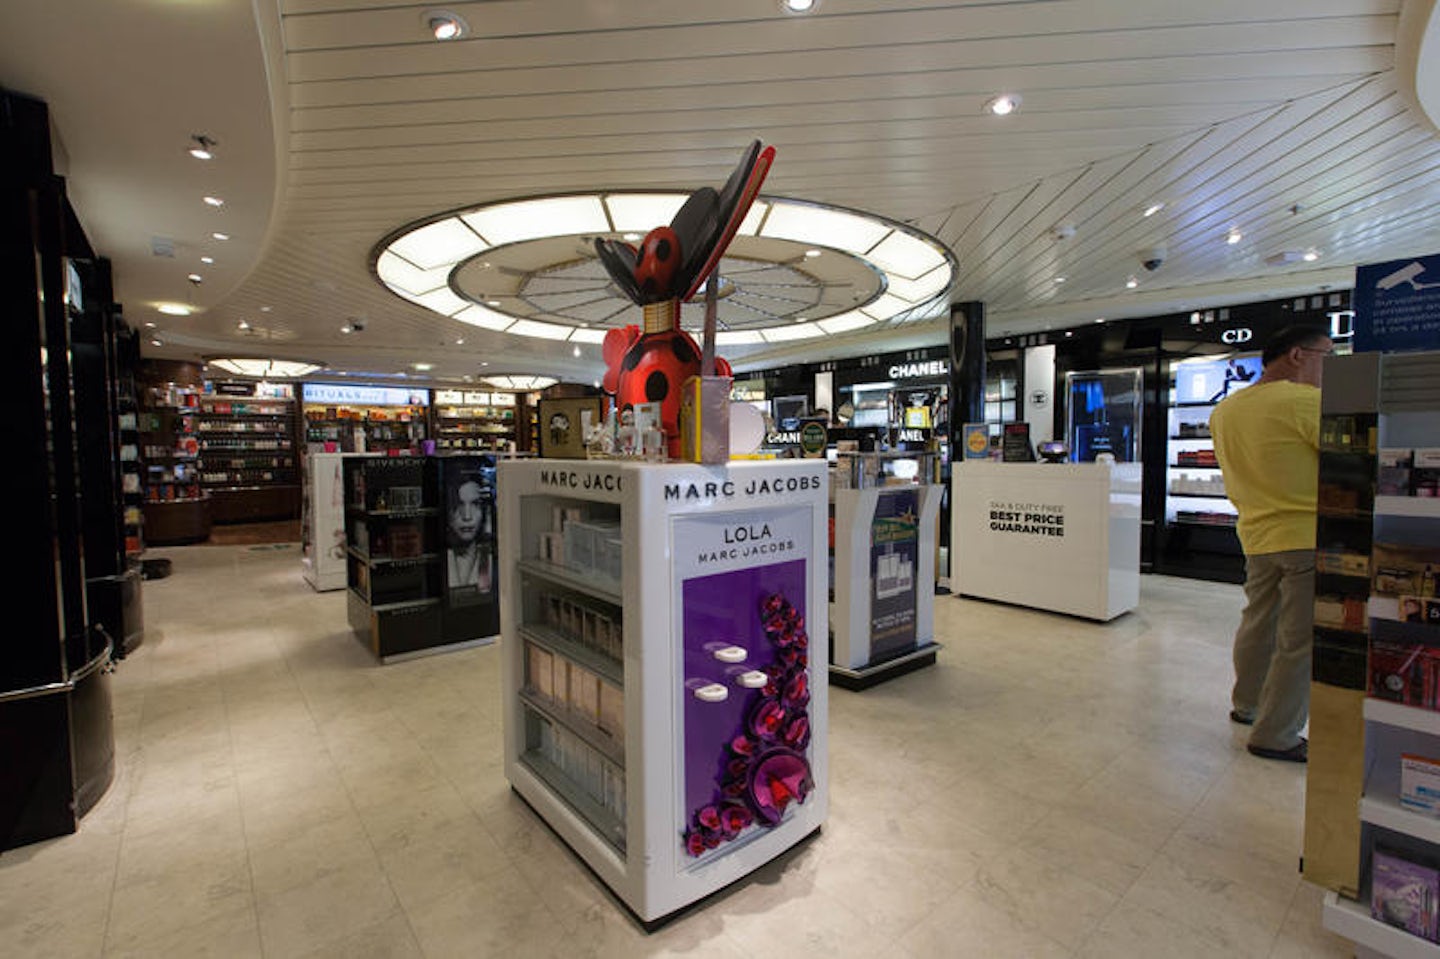 Tax & Duty Free Shop on Independence of the Seas